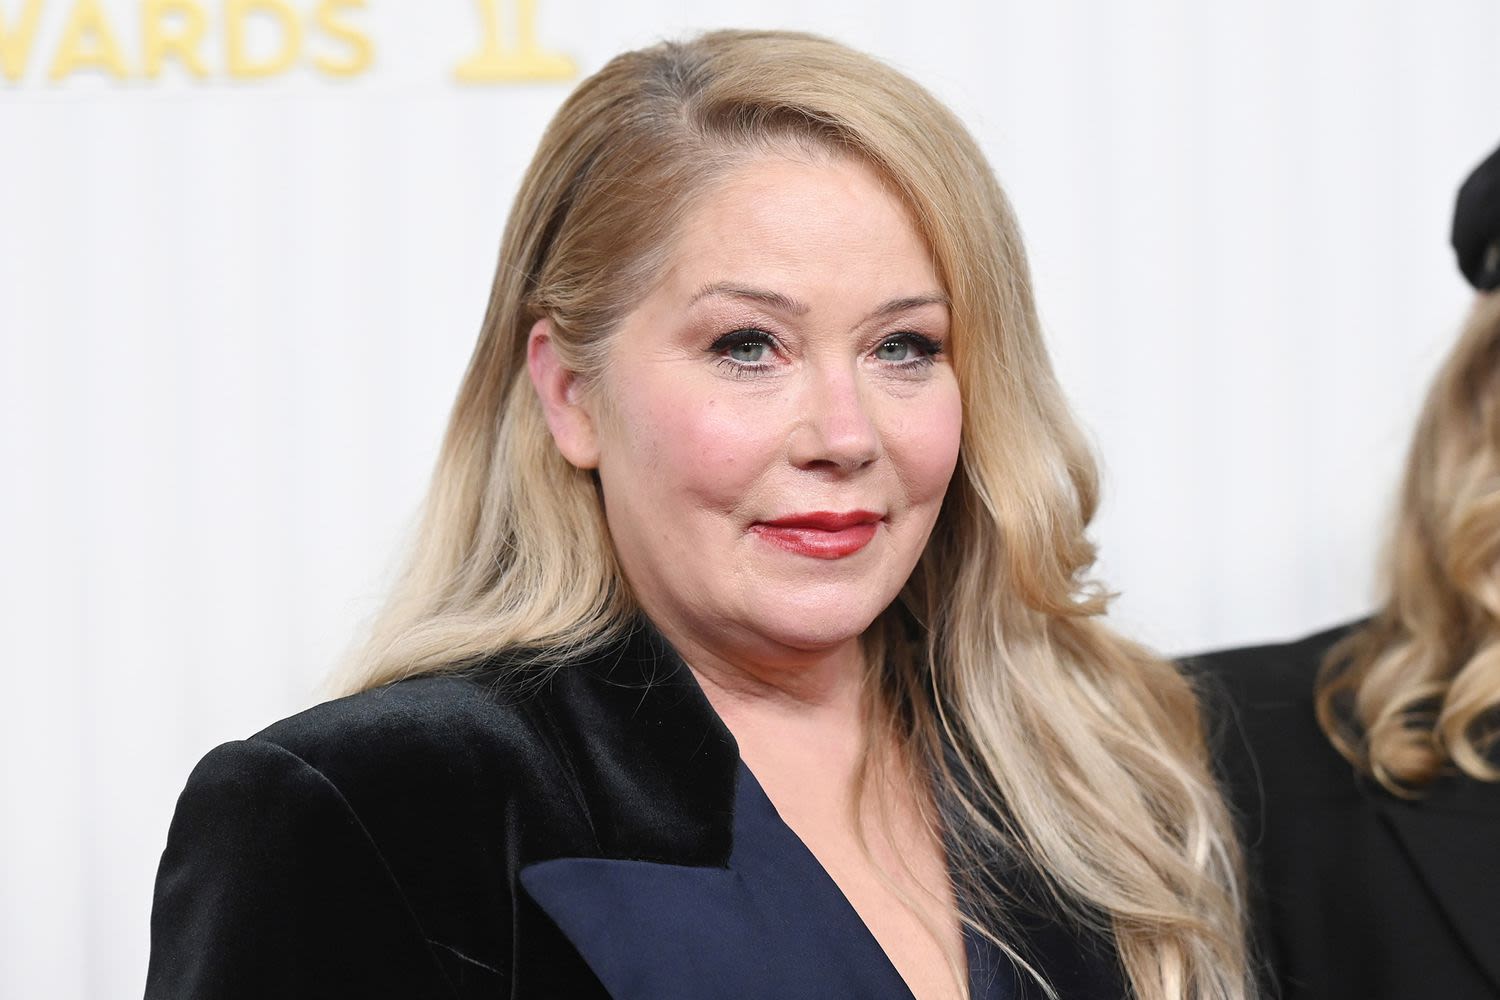 Christina Applegate clarifies 'I don't enjoy living' comment: 'I'm not sitting here on suicide watch'